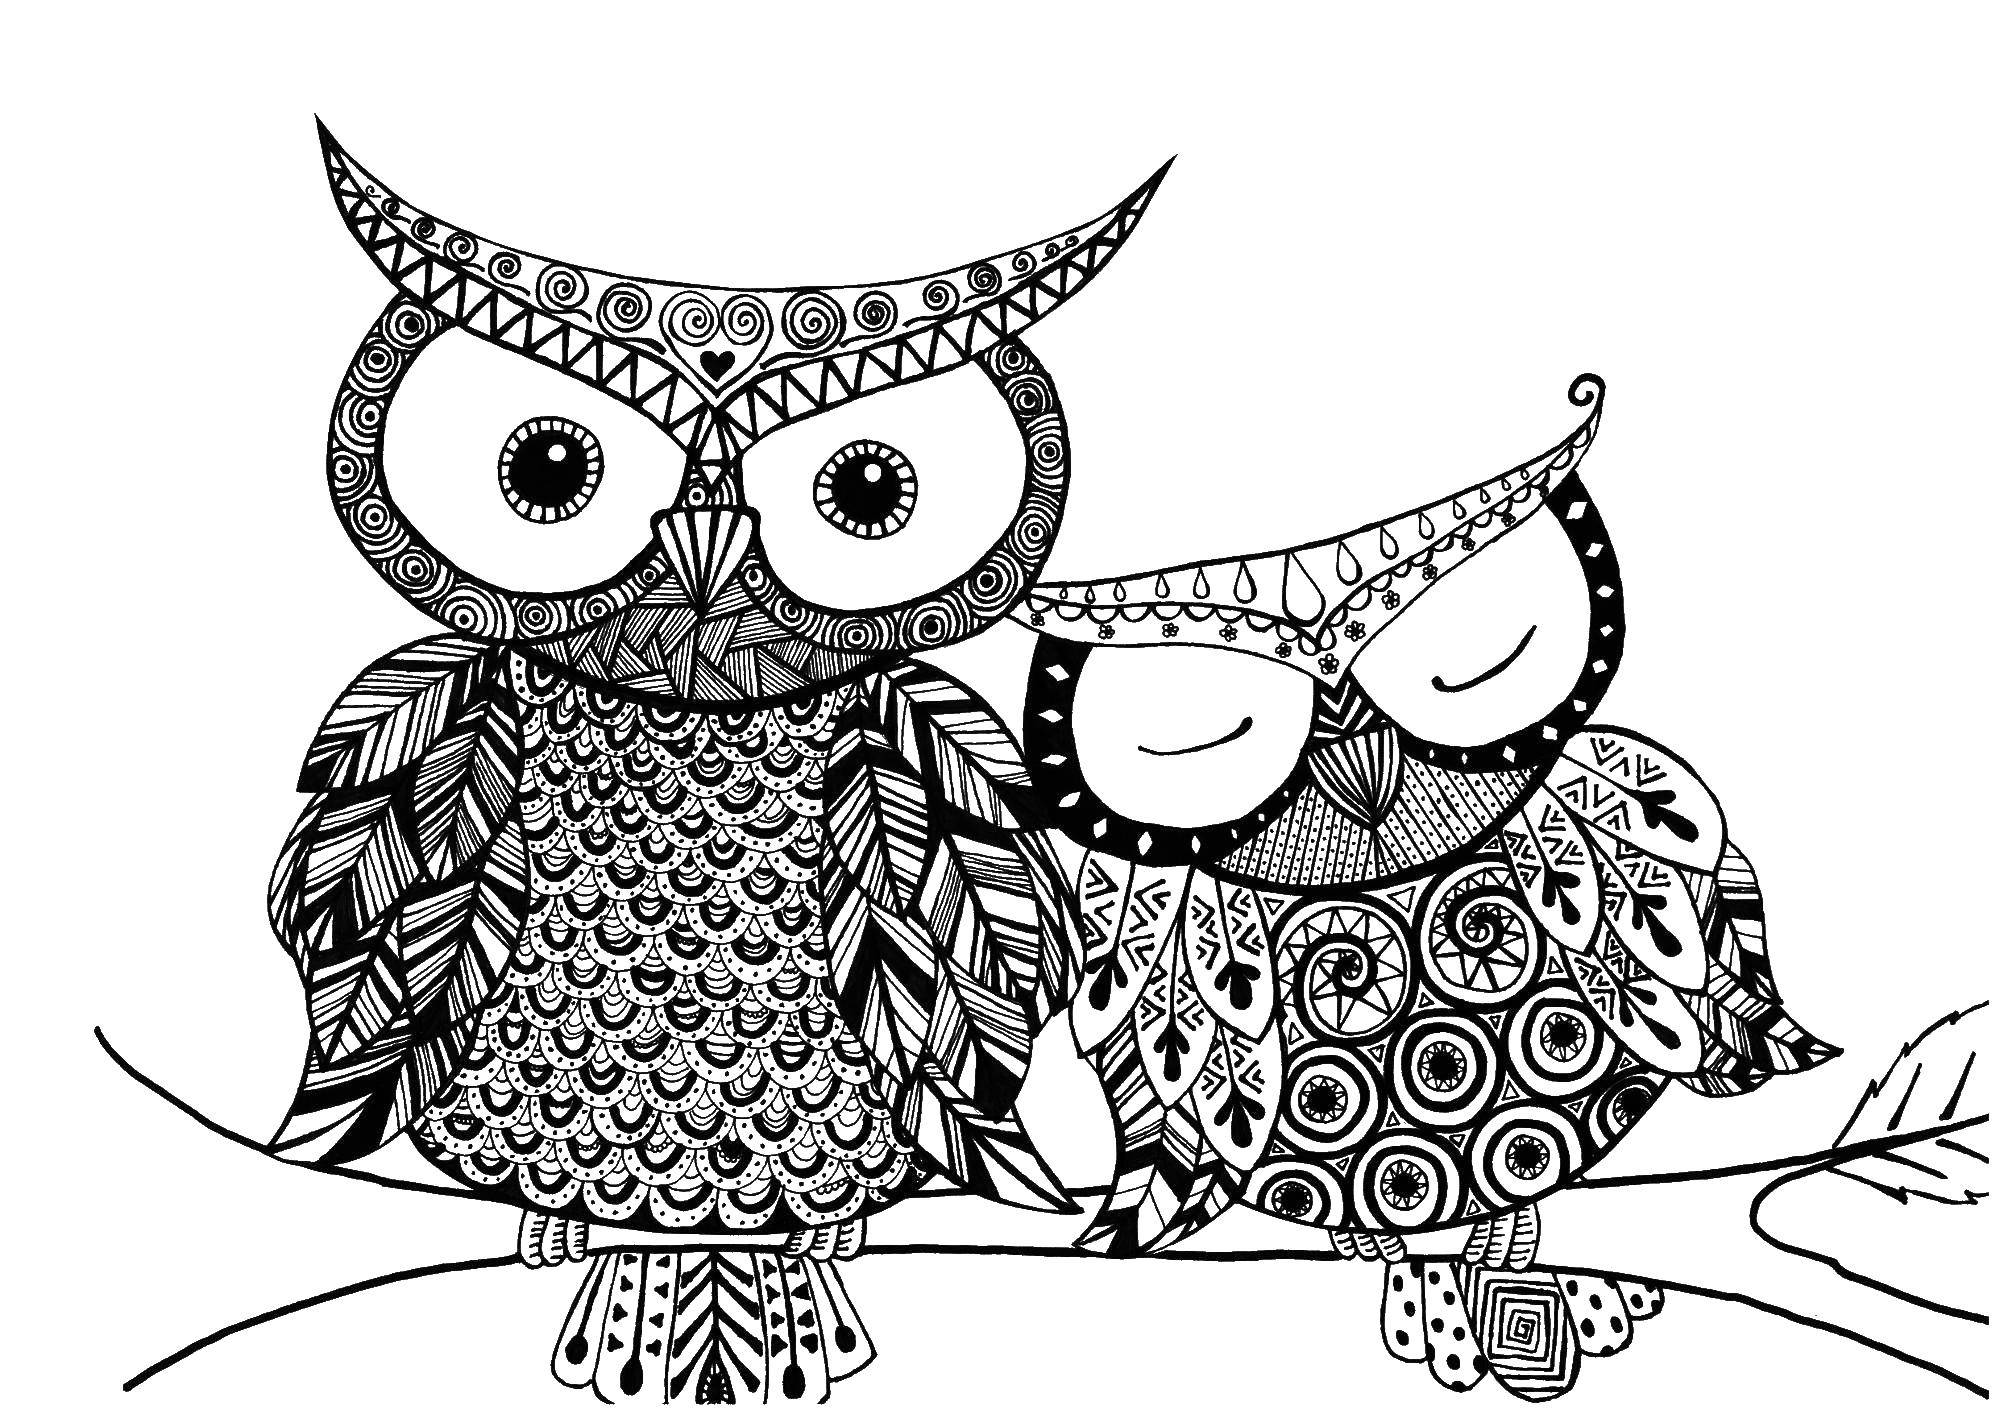 Coloring Ethnic owls. Category patterns. Tags:  Patterns, ethnic.